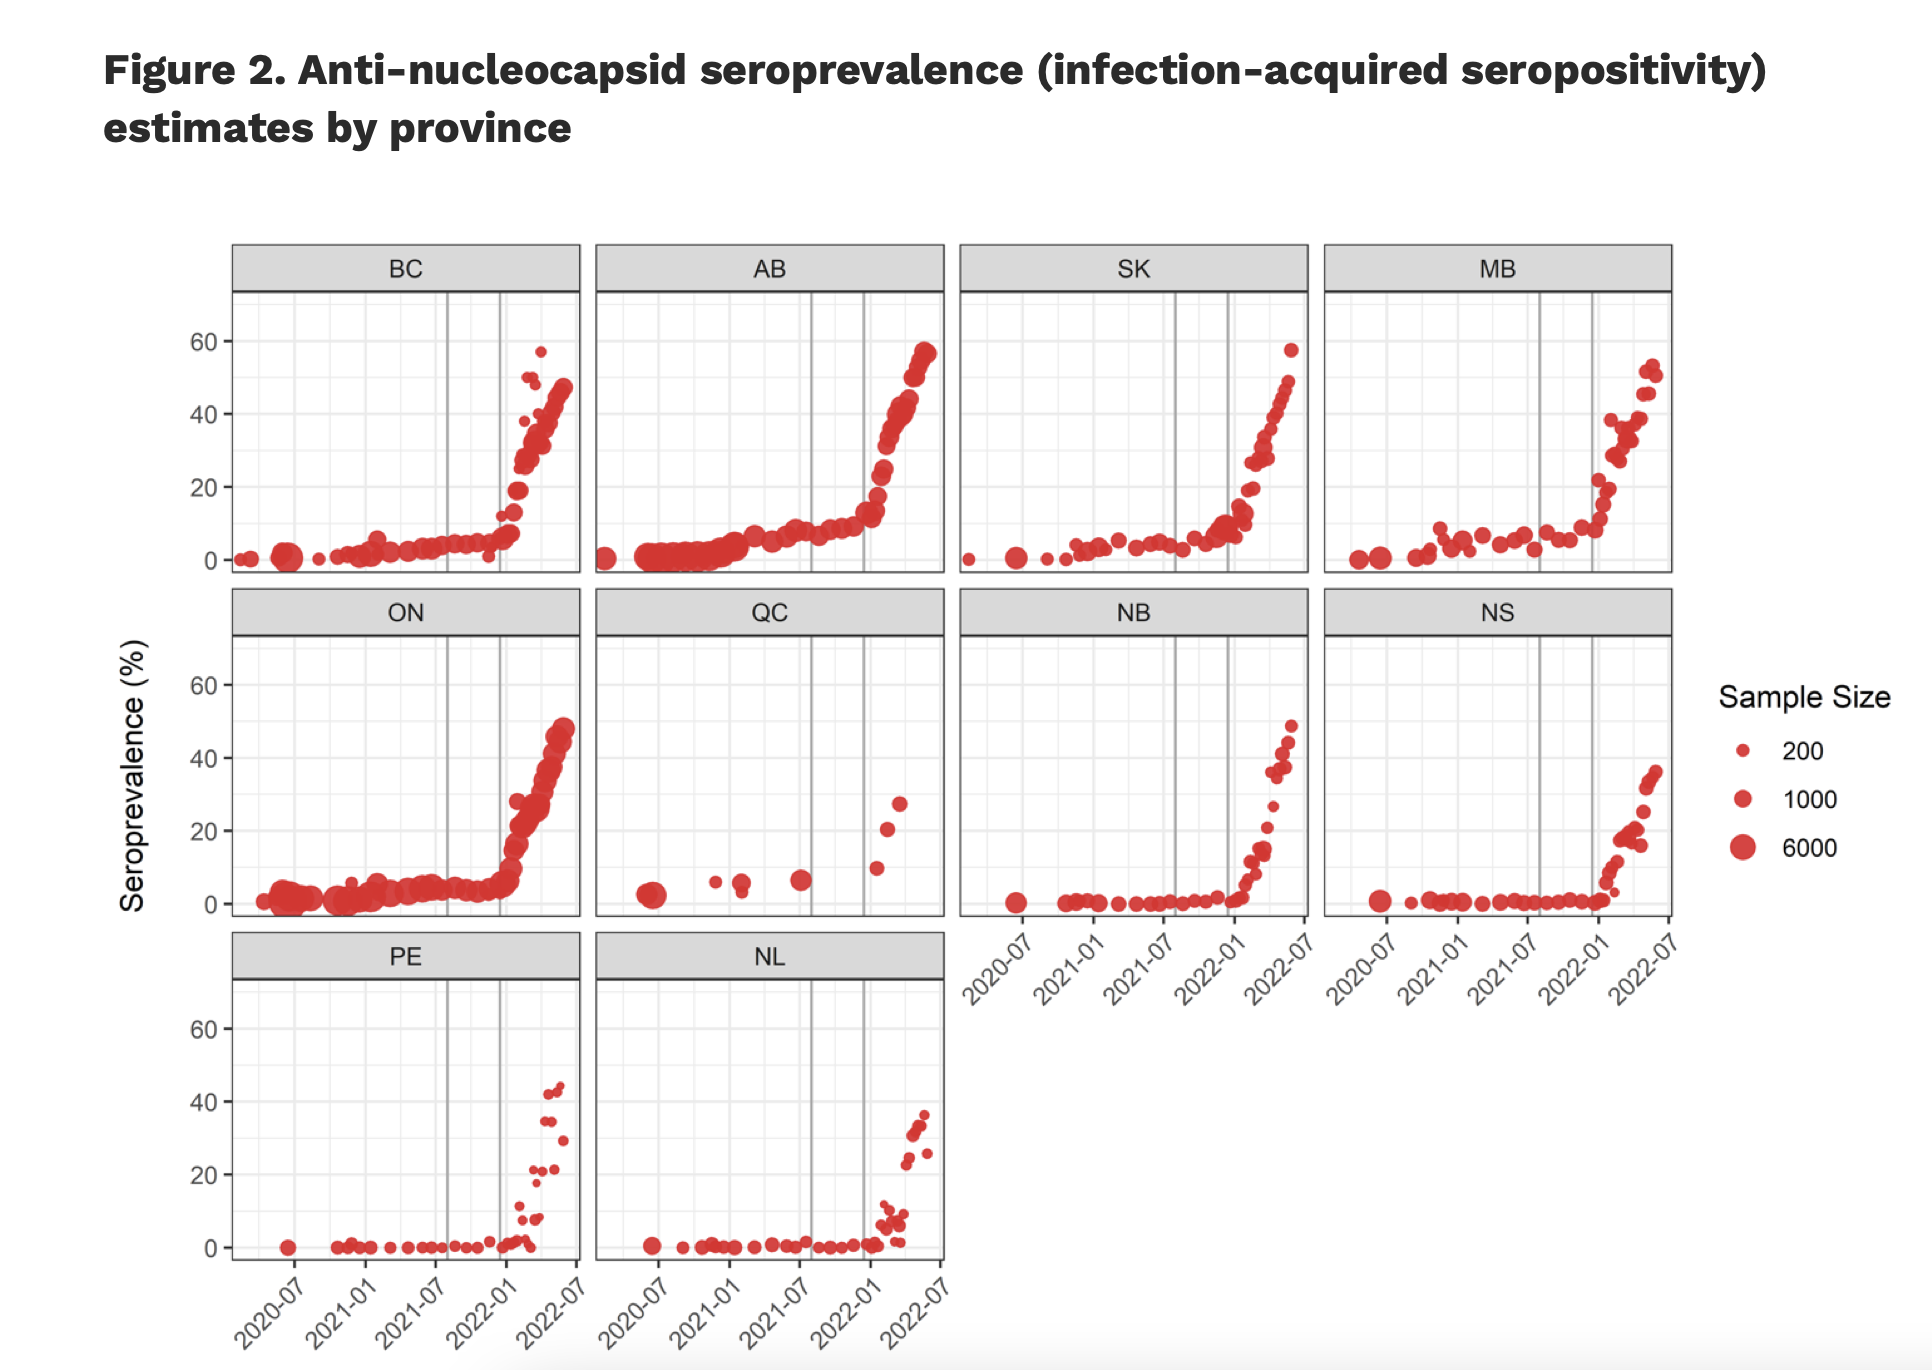 Chart showing the estimates of infection-acquired seropositivity by province. 